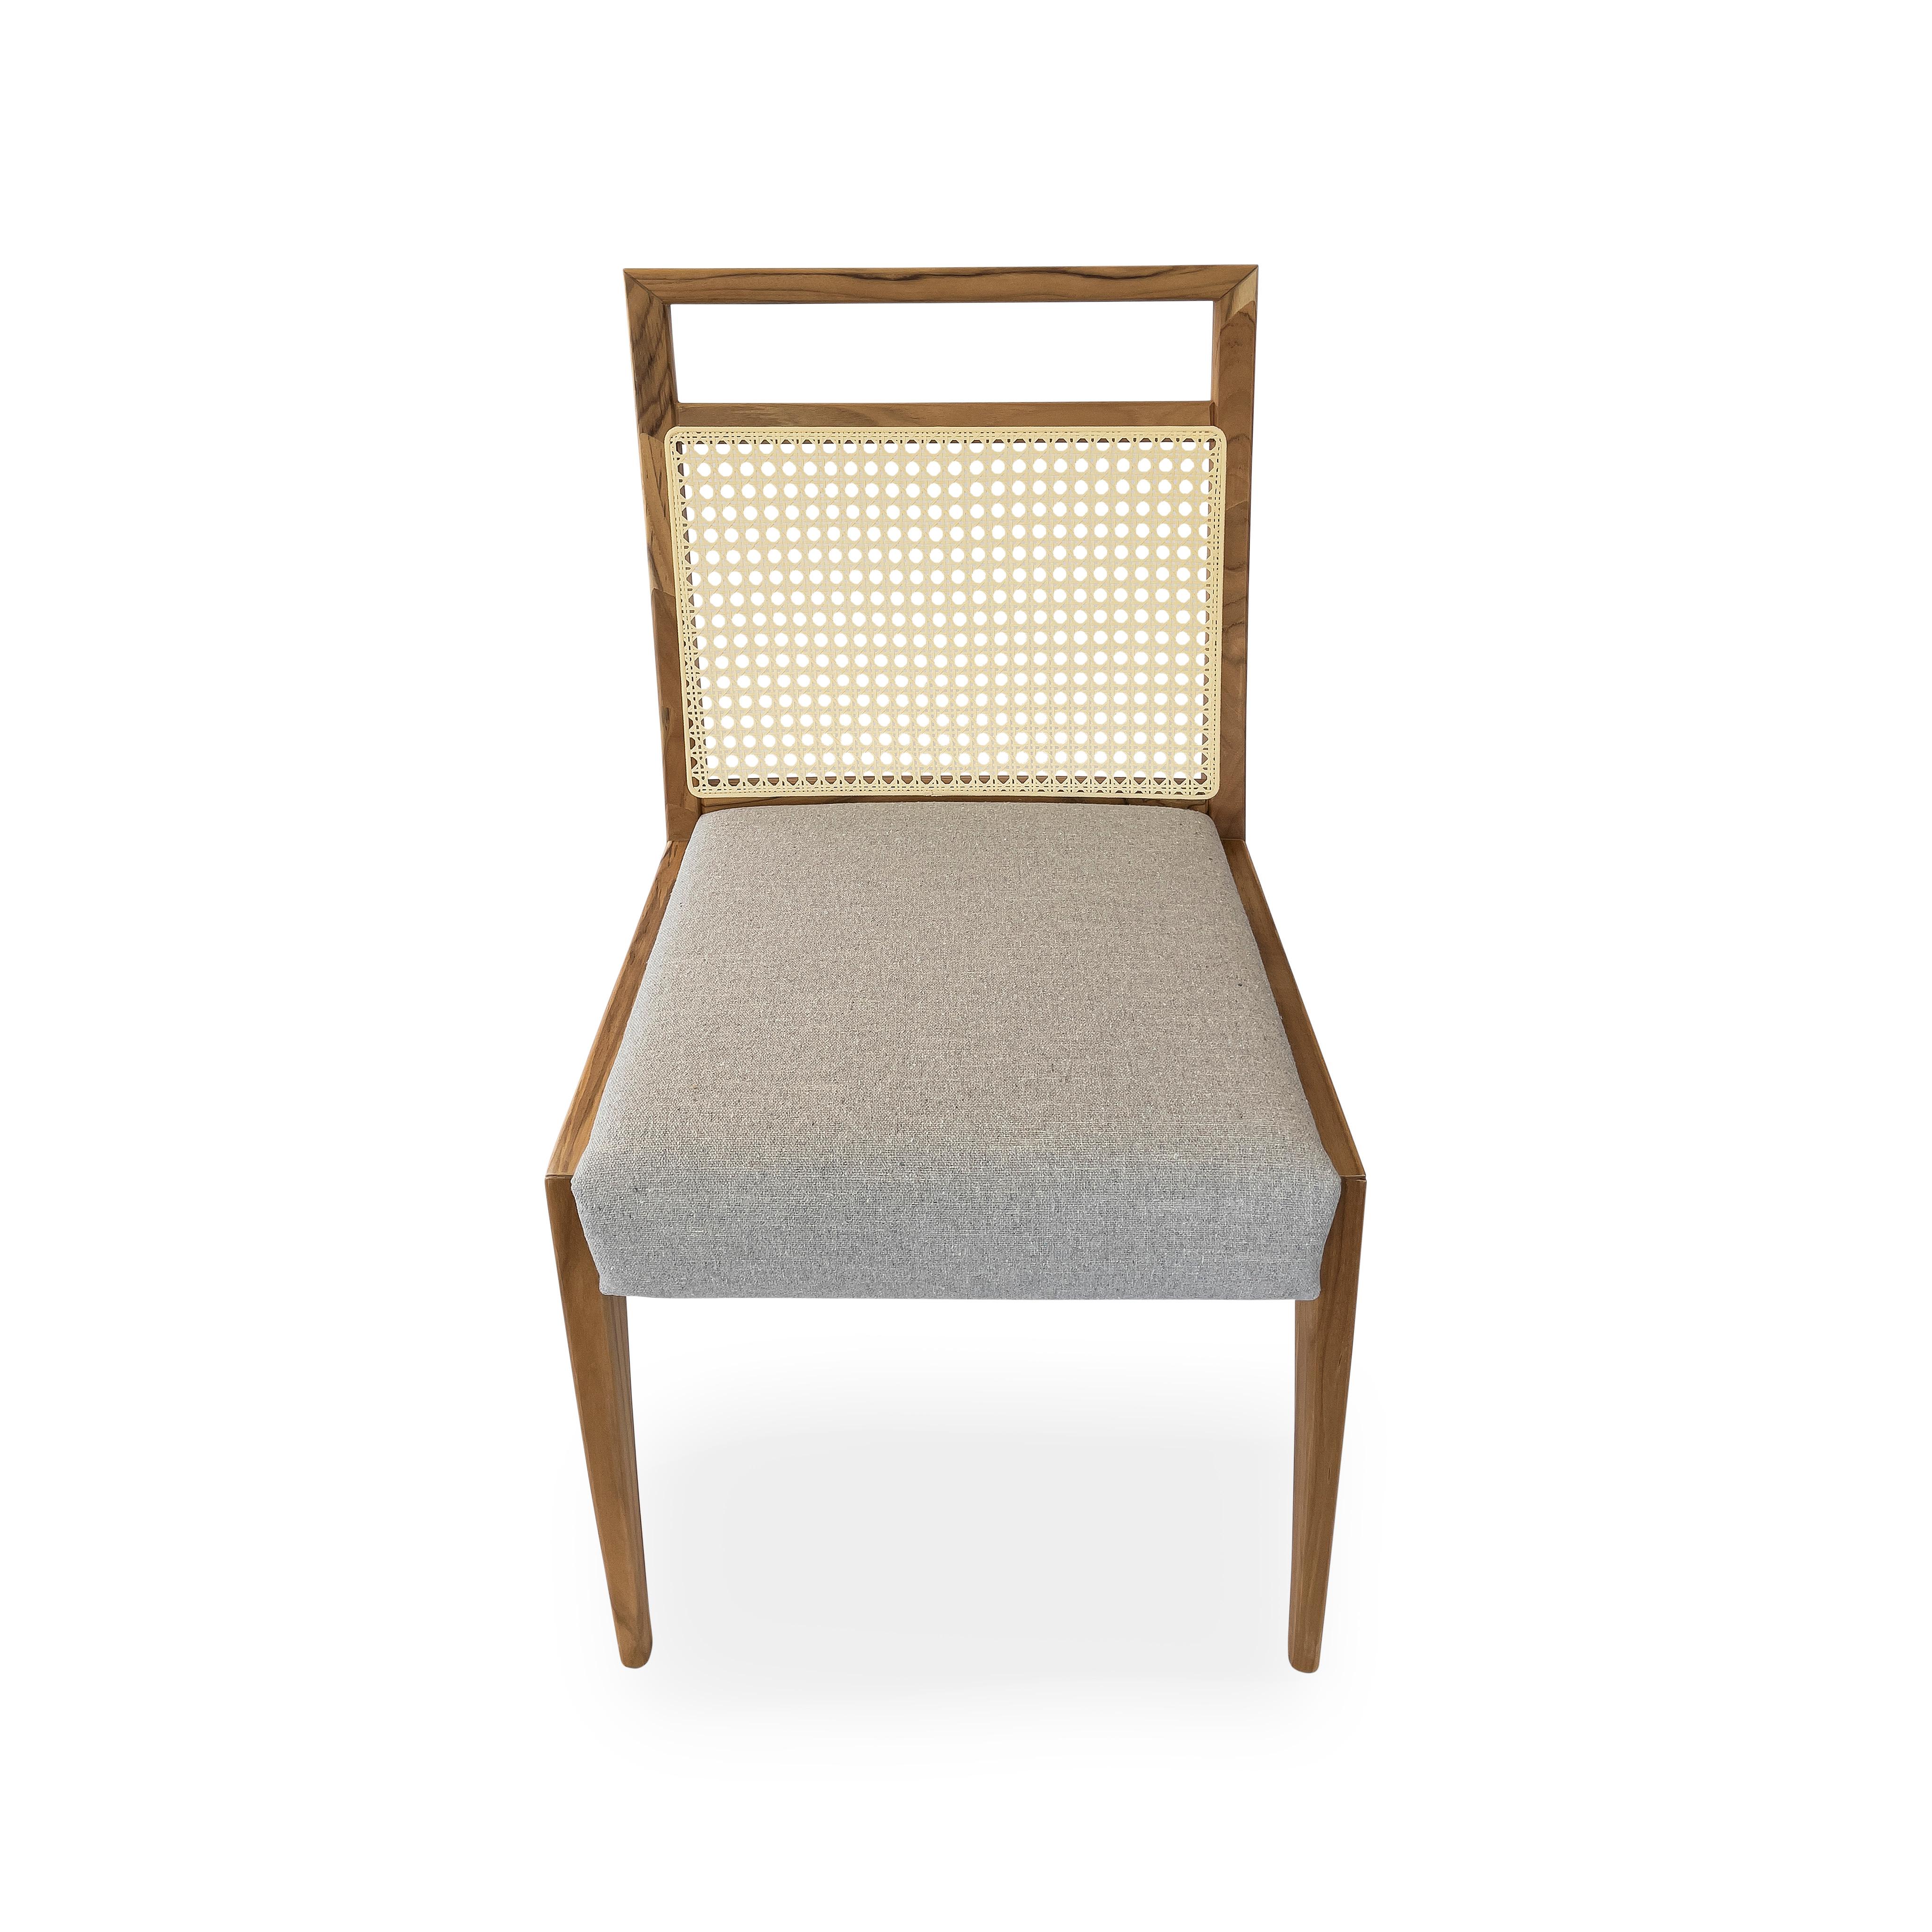 Caning Sotto Cane-Back Dining Chair in Teak Wood with Light Gray Fabric, set of 2 For Sale